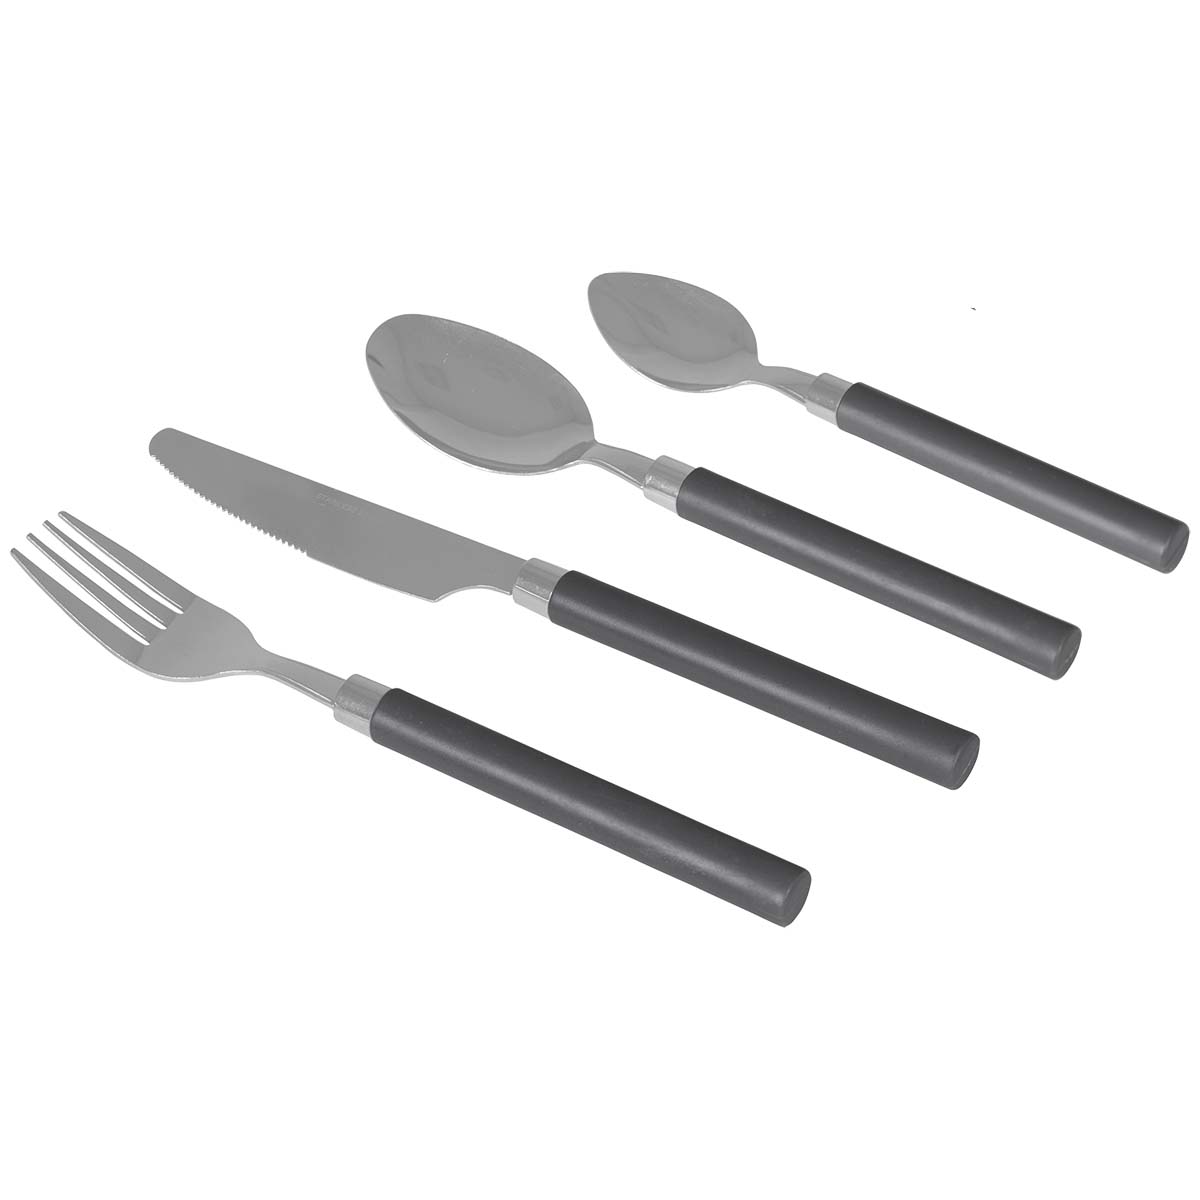 6102104 A 24-part cutlery set. This practical set is suitable for 6 people and consists of 6 knives, 6 forks, 6 spoons and 6 small (tea) spoons. Made of stainless steel with a plastic handle, which gives the set a long product life.